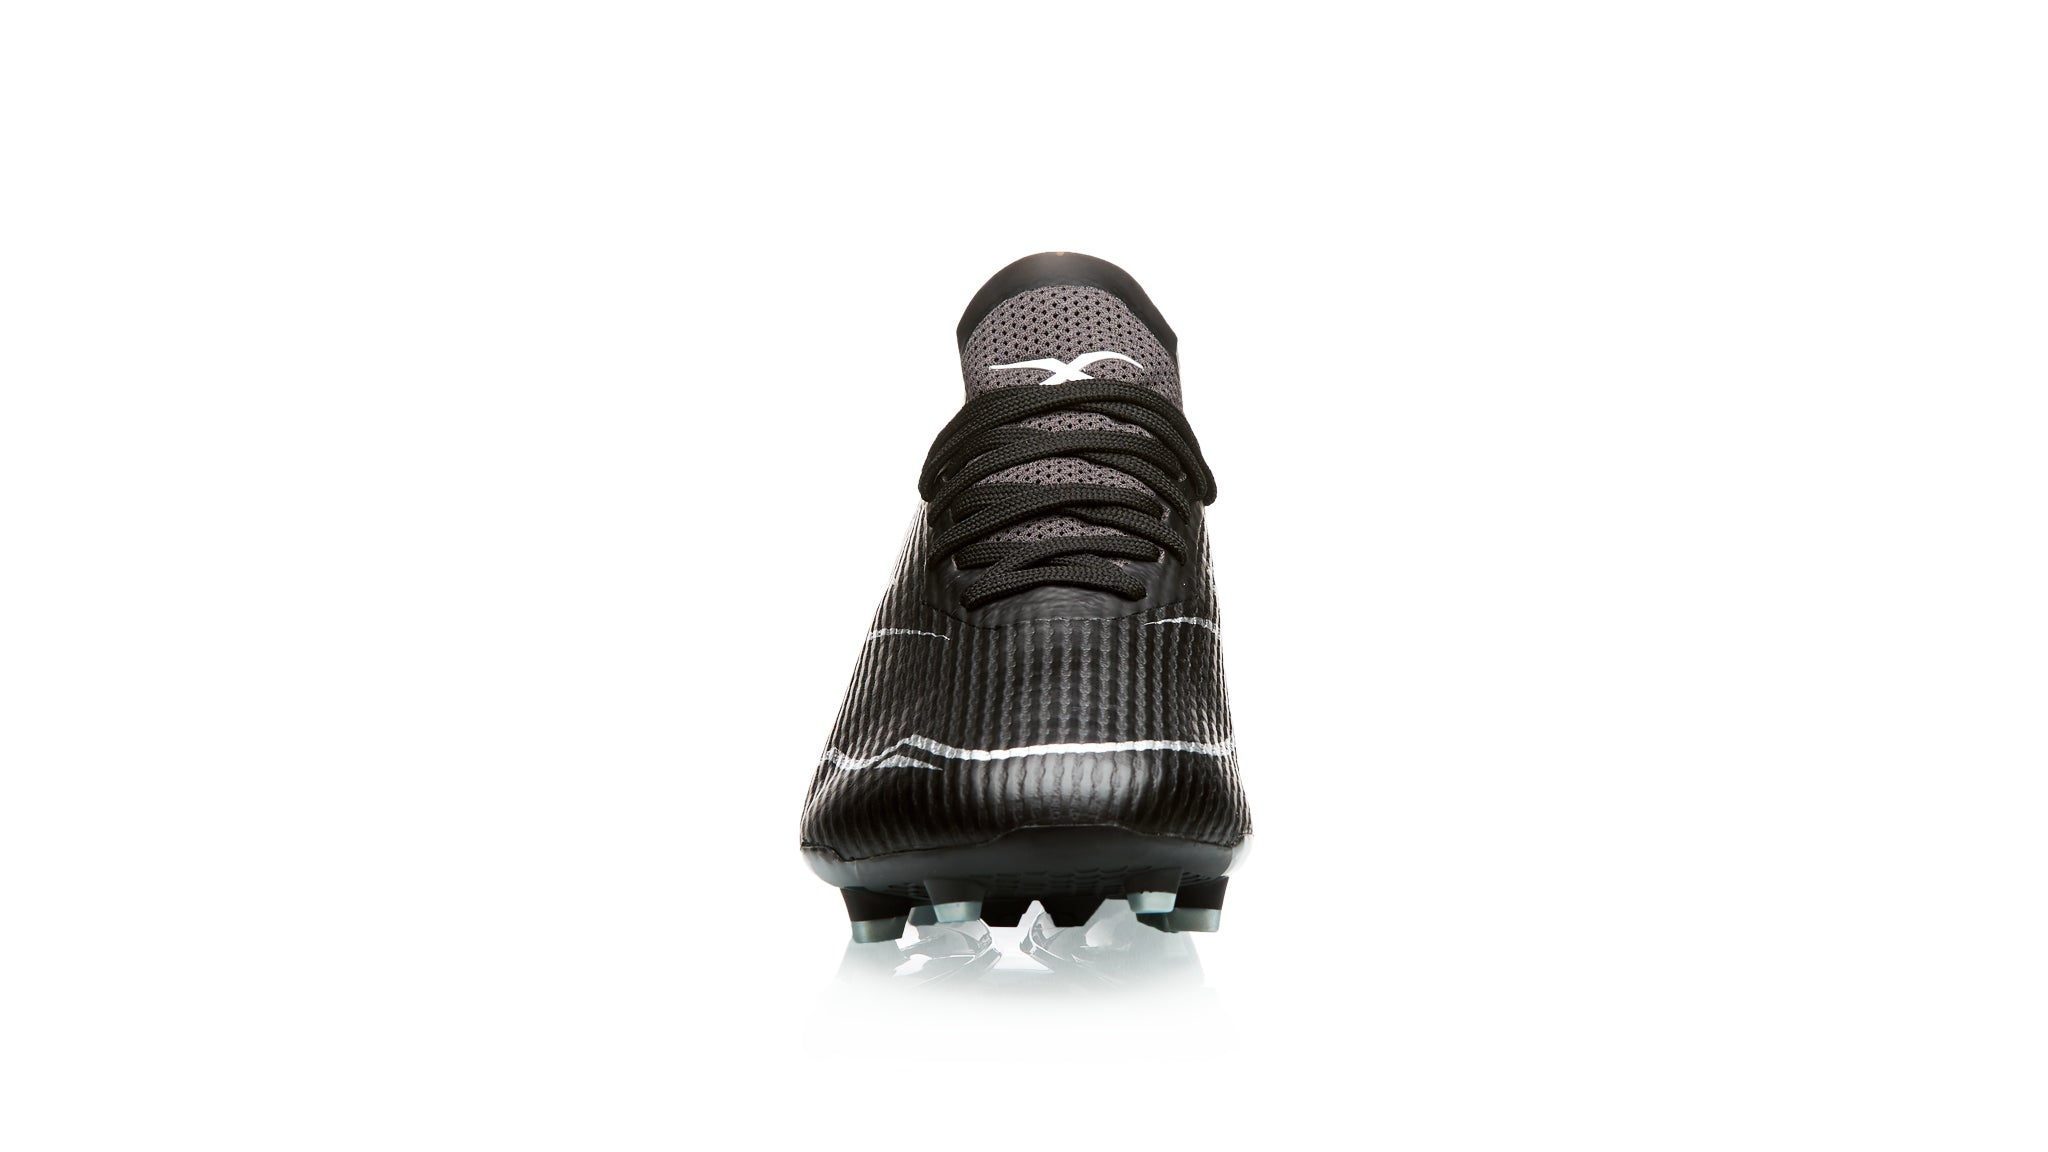 black-and-silver-womens-football-boot-xblades